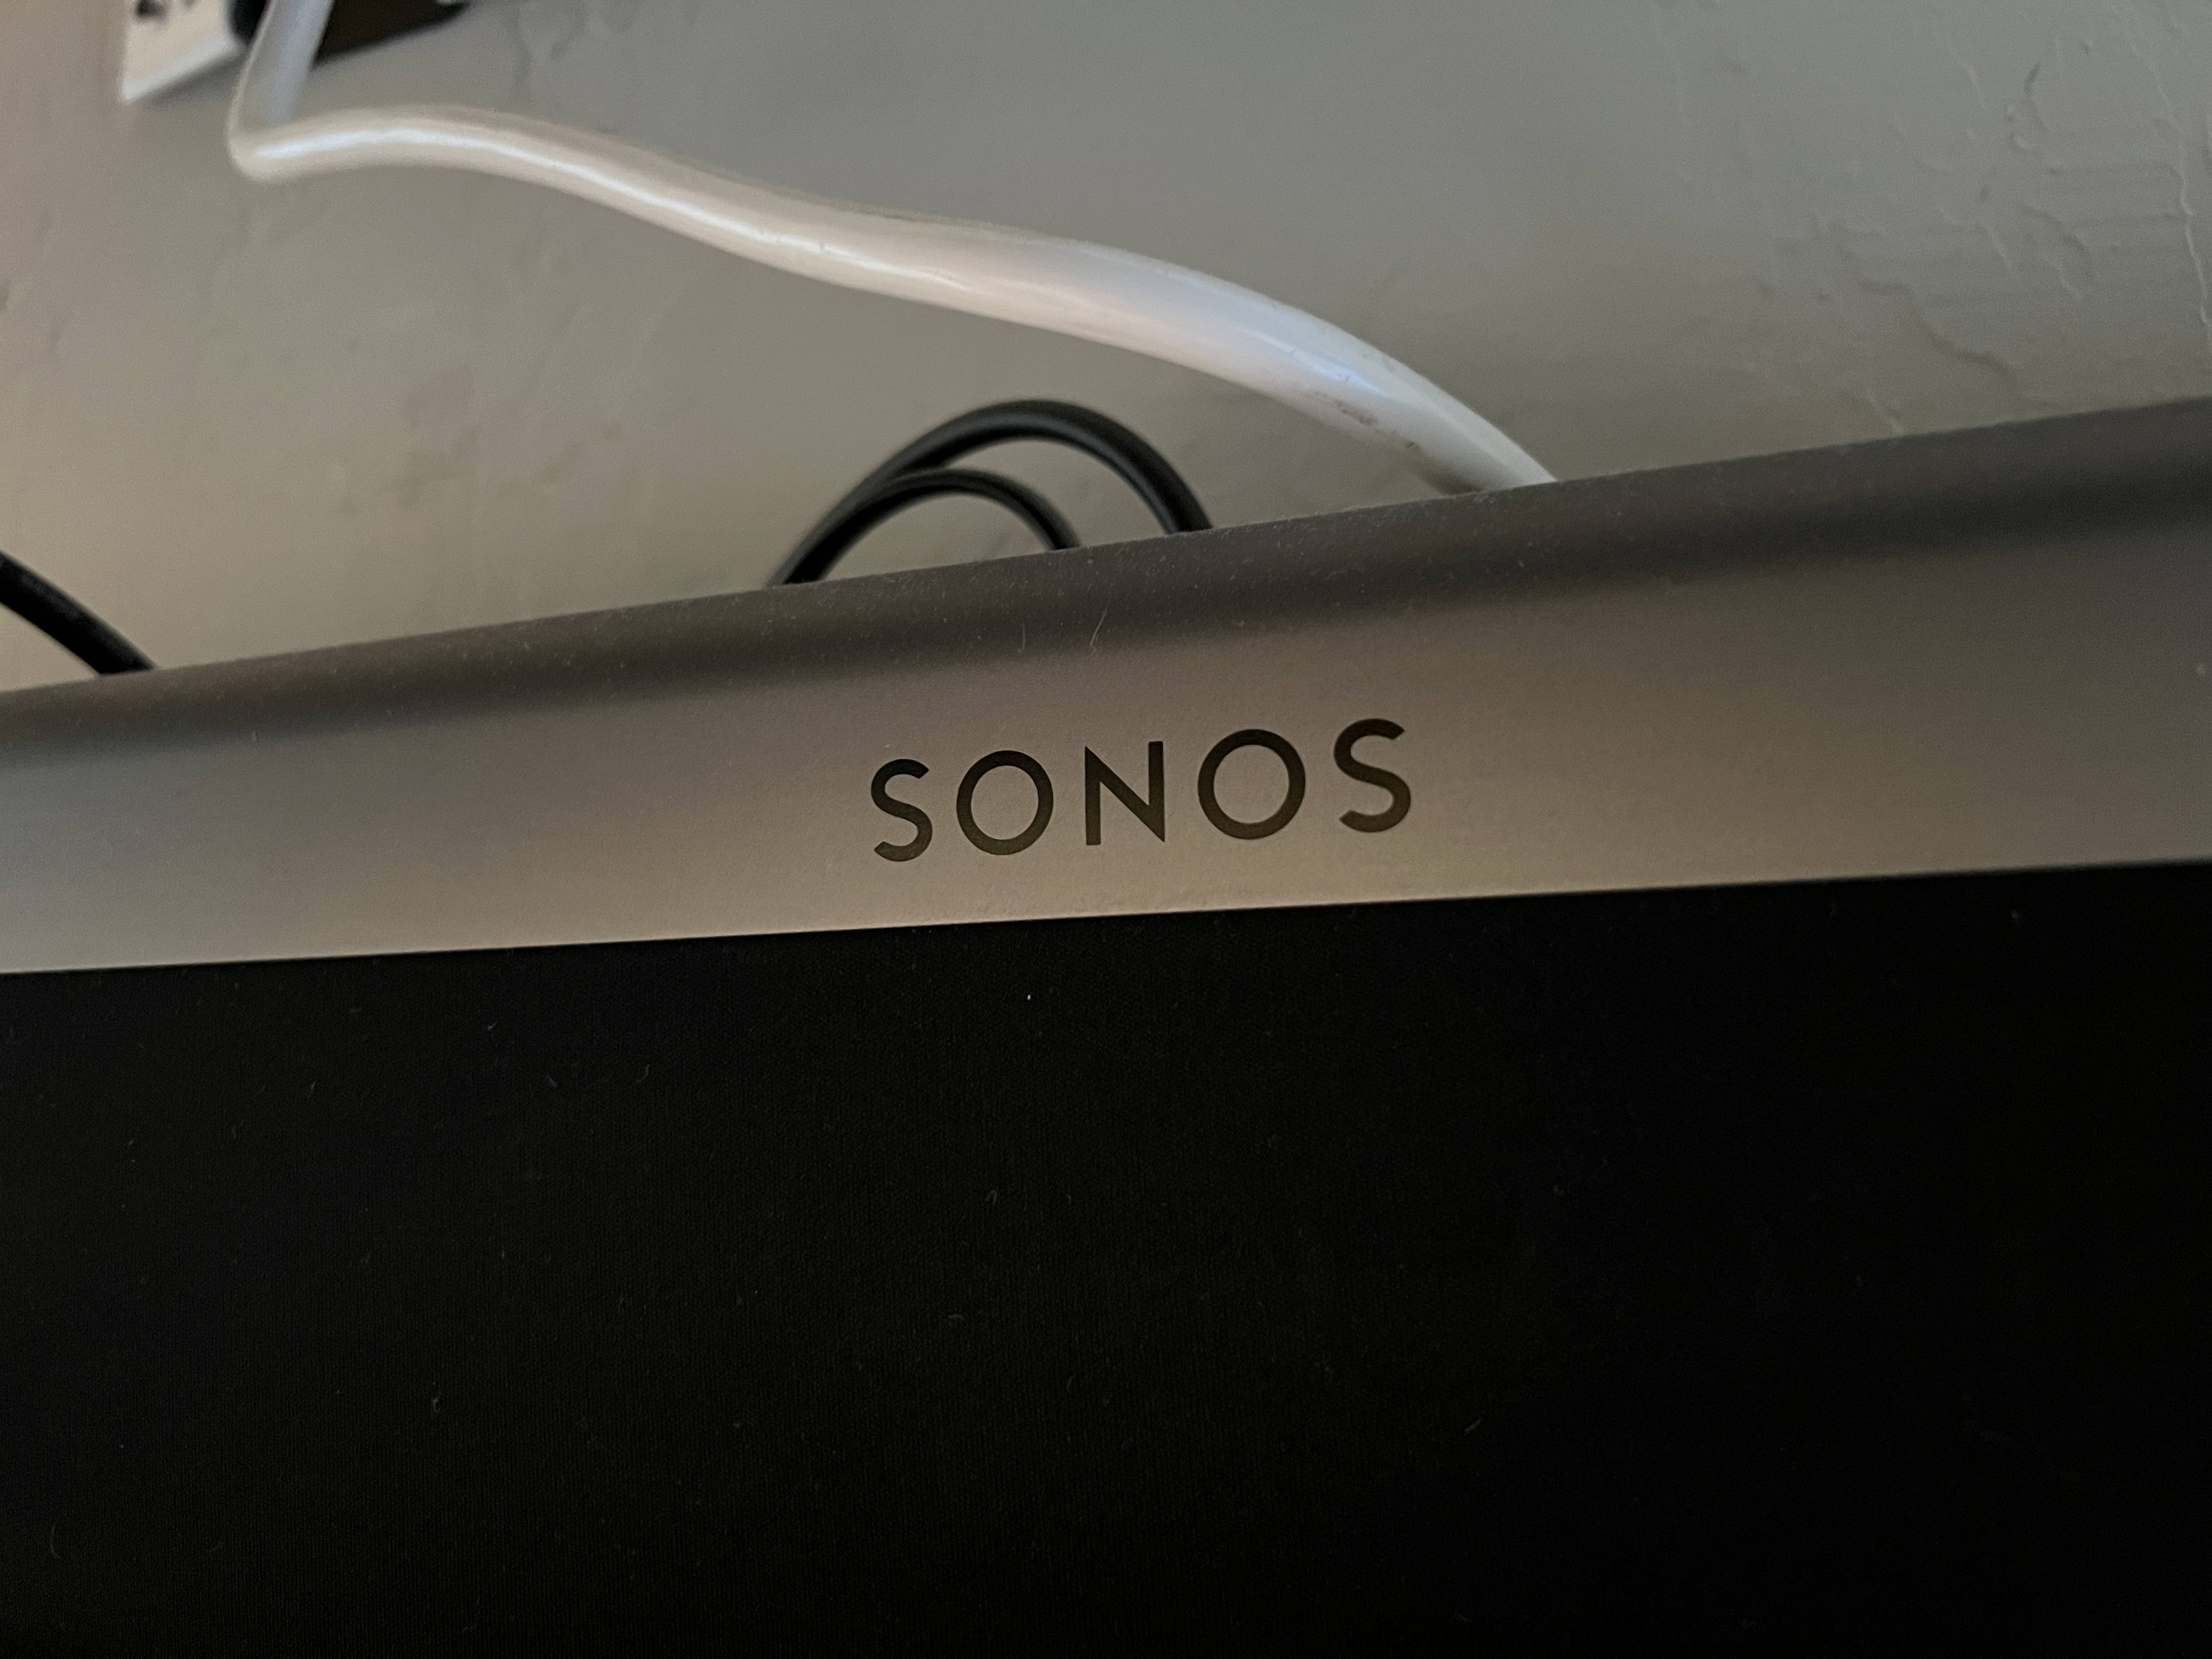 Sonos logo is pictured